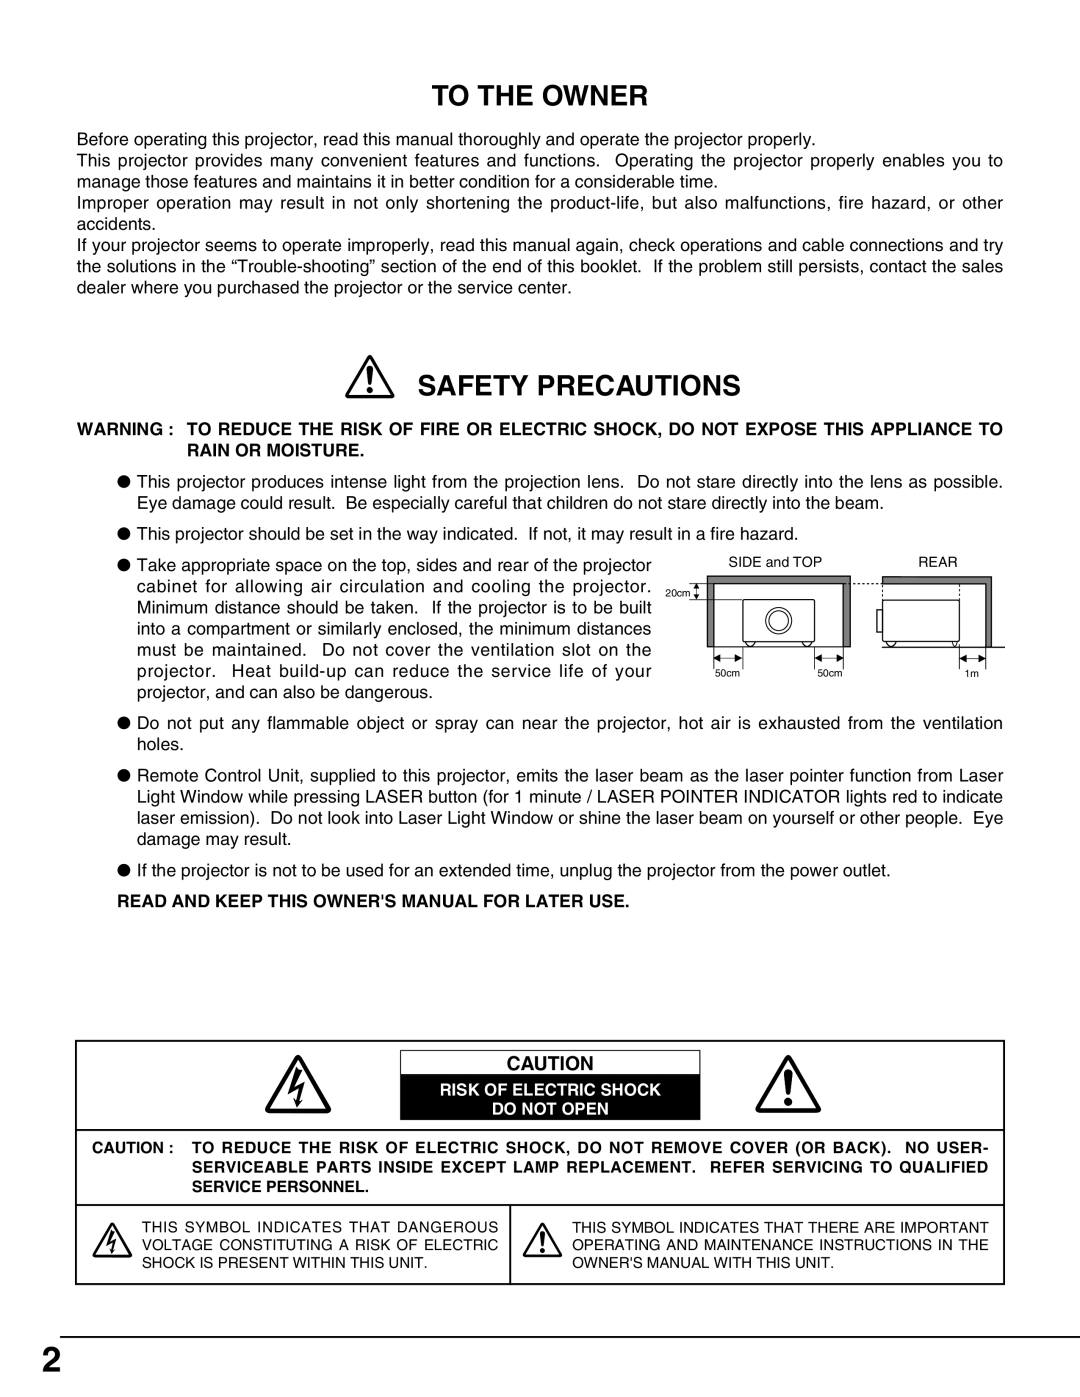 Eiki LC-SX4LA instruction manual To The Owner, Safety Precautions, Read And Keep This Owners Manual For Later Use 